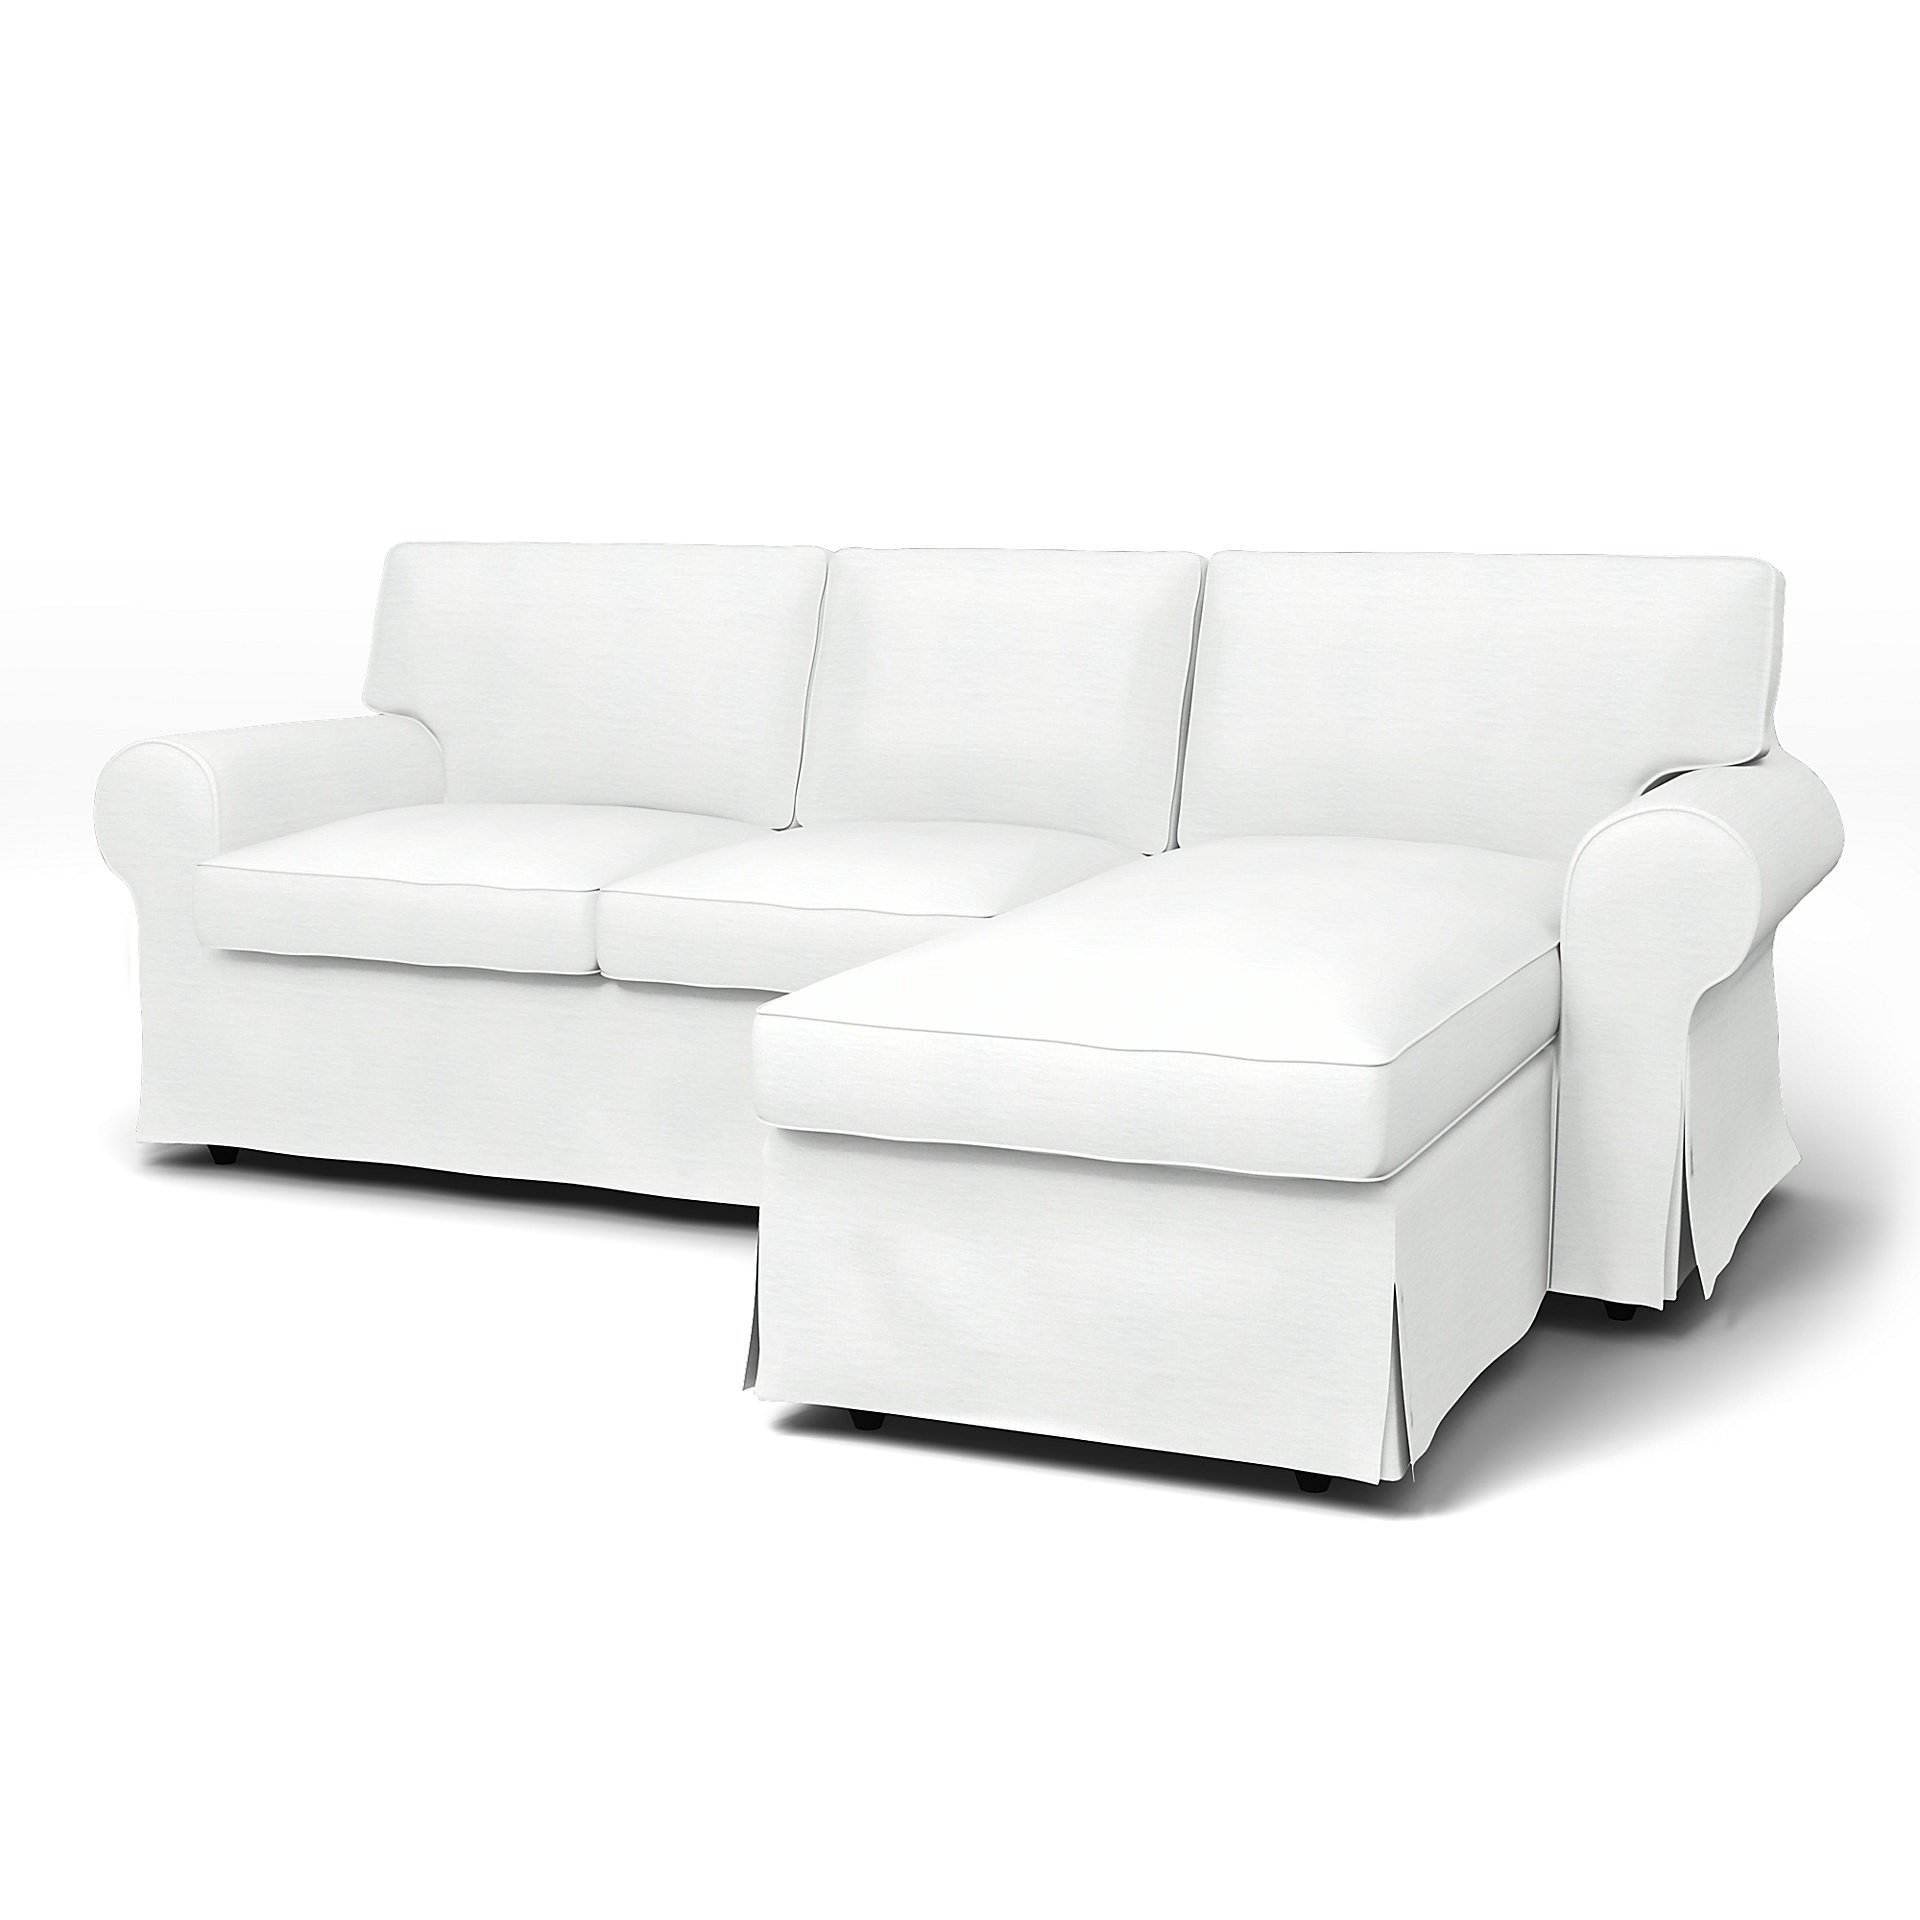 IKEA - Ektorp 3 Seater Sofa with Chaise Cover, White, Linen - Bemz